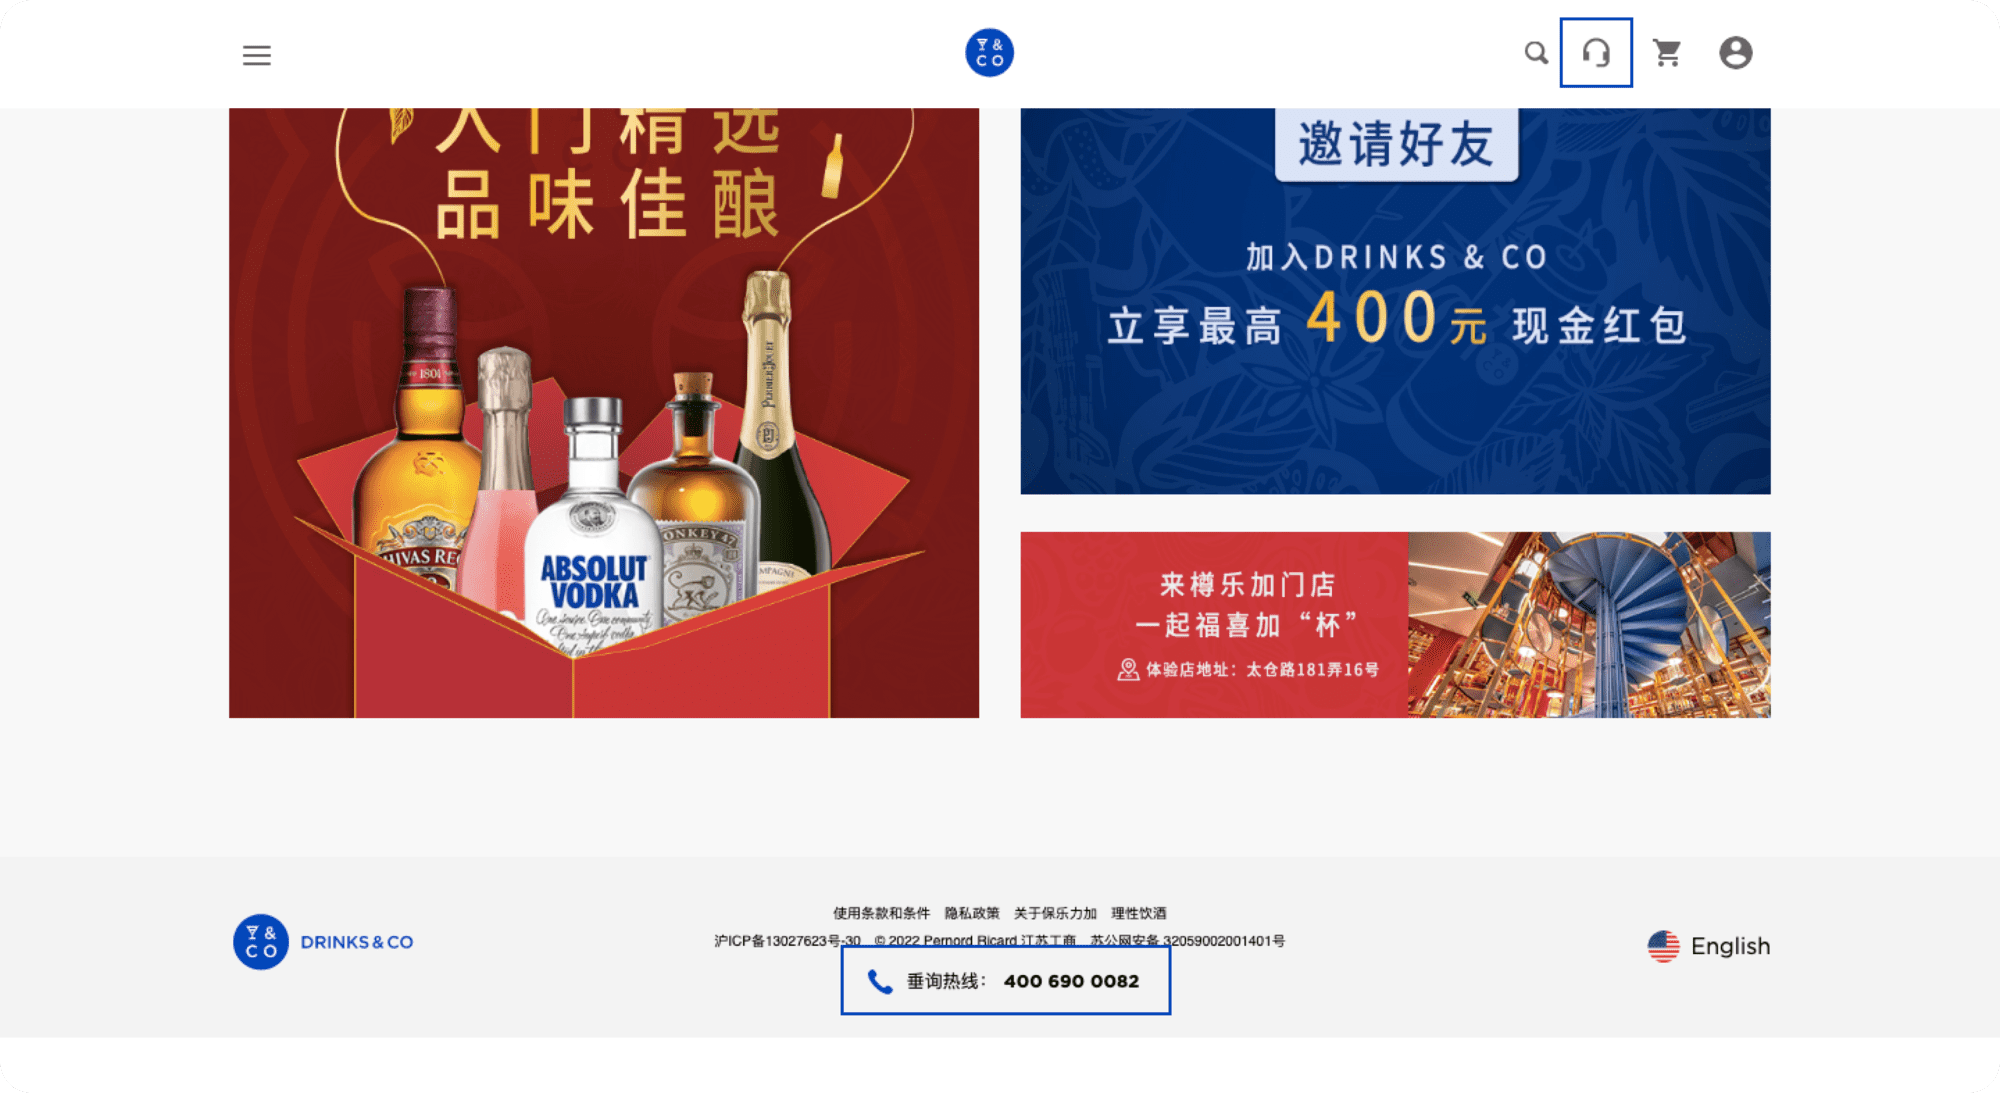 Drinks&Co Chinese eCommerce website enables customers to reach them via the Hotline number and Chat Bot function